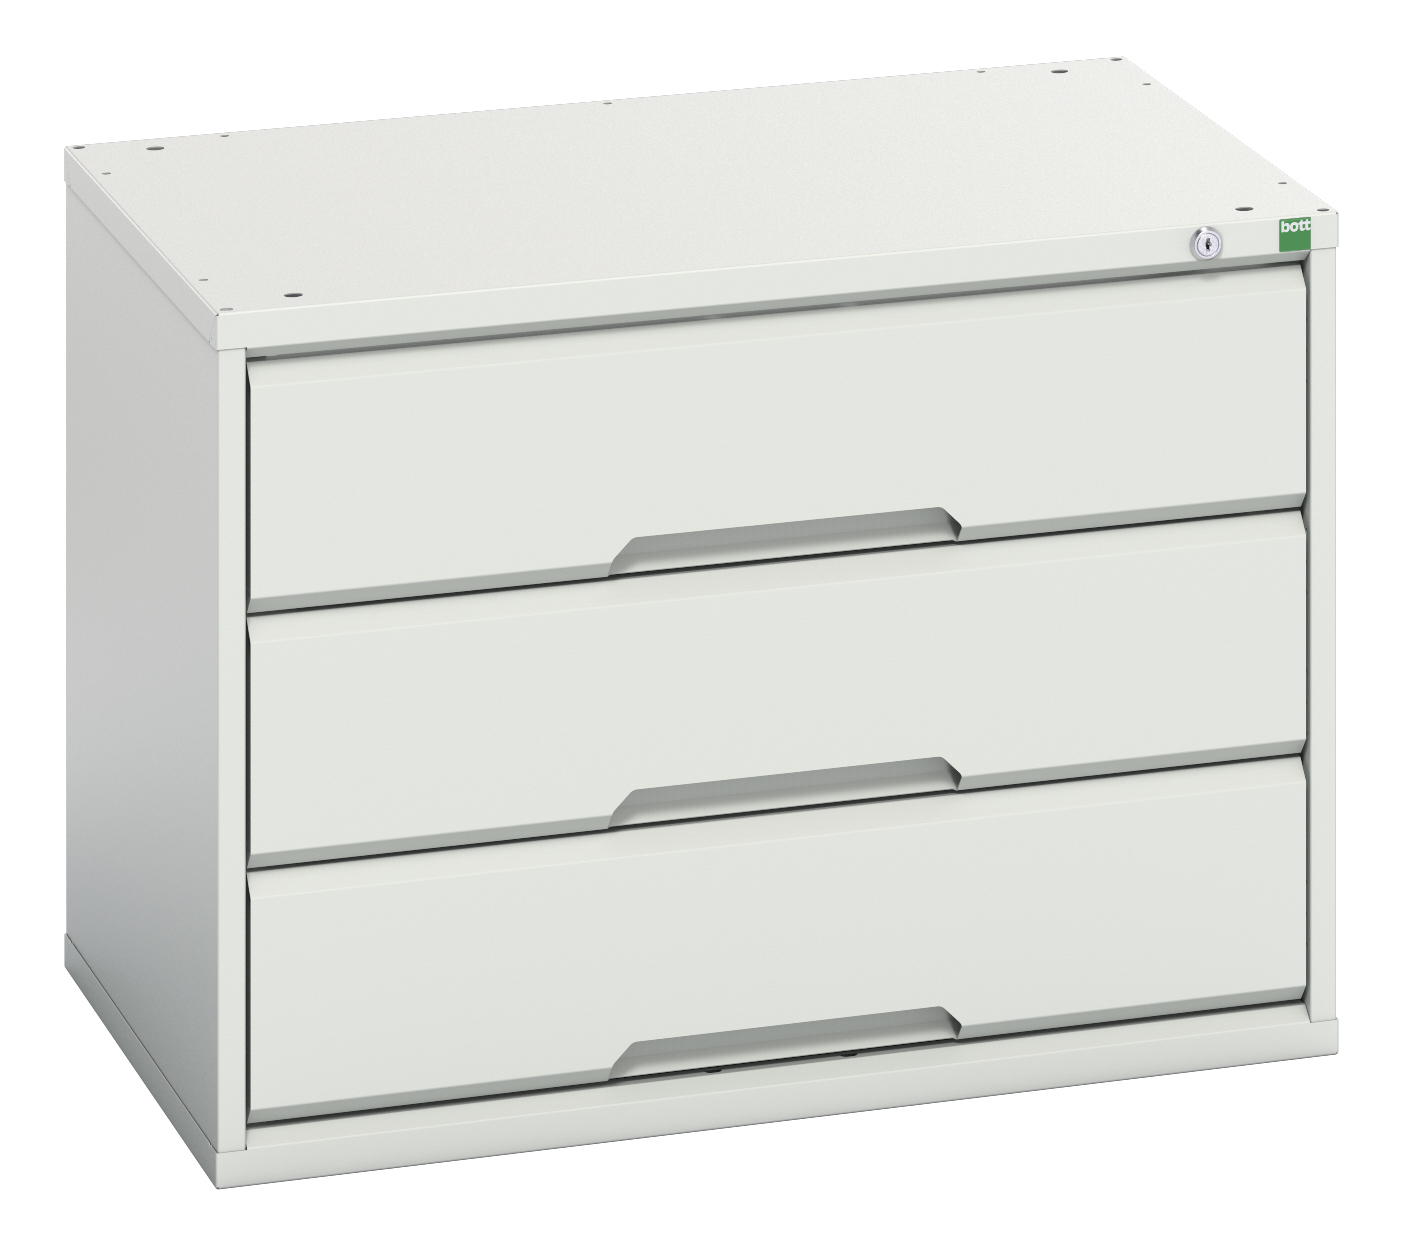 Bott Verso Drawer Cabinet With 3 Drawers - 16925103.16